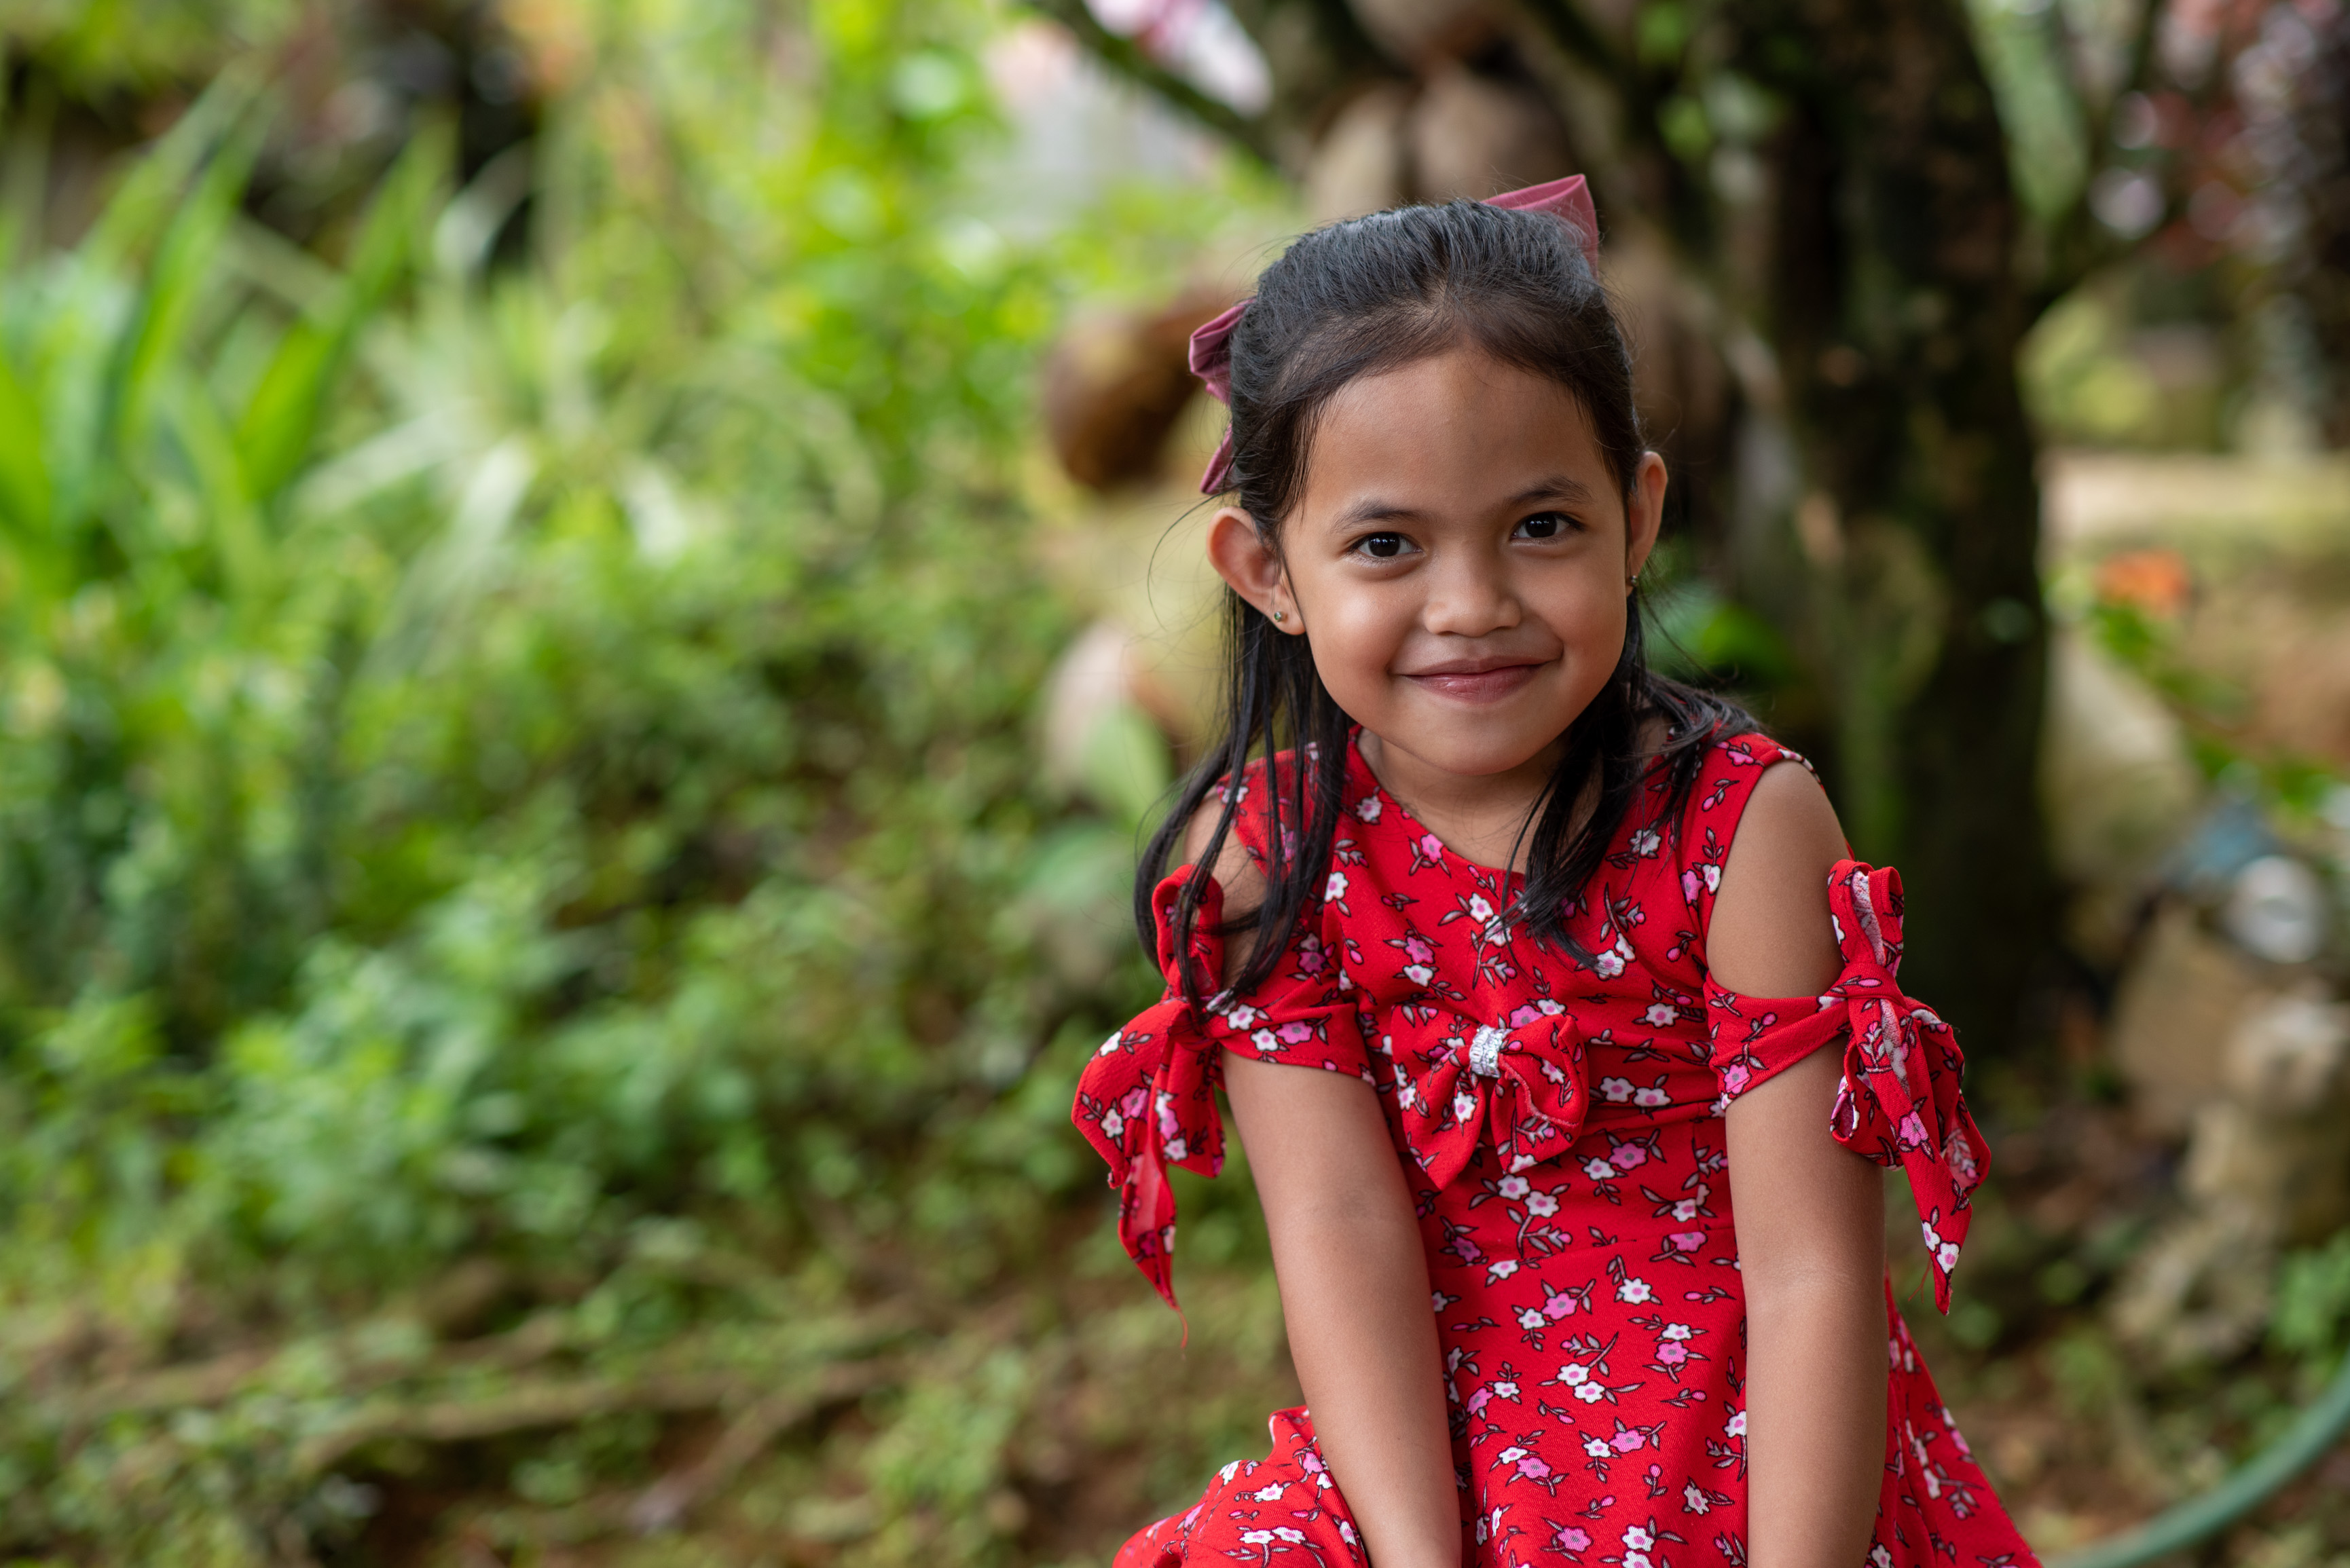 Five-year-old Patricia, aspires to be a doctor.